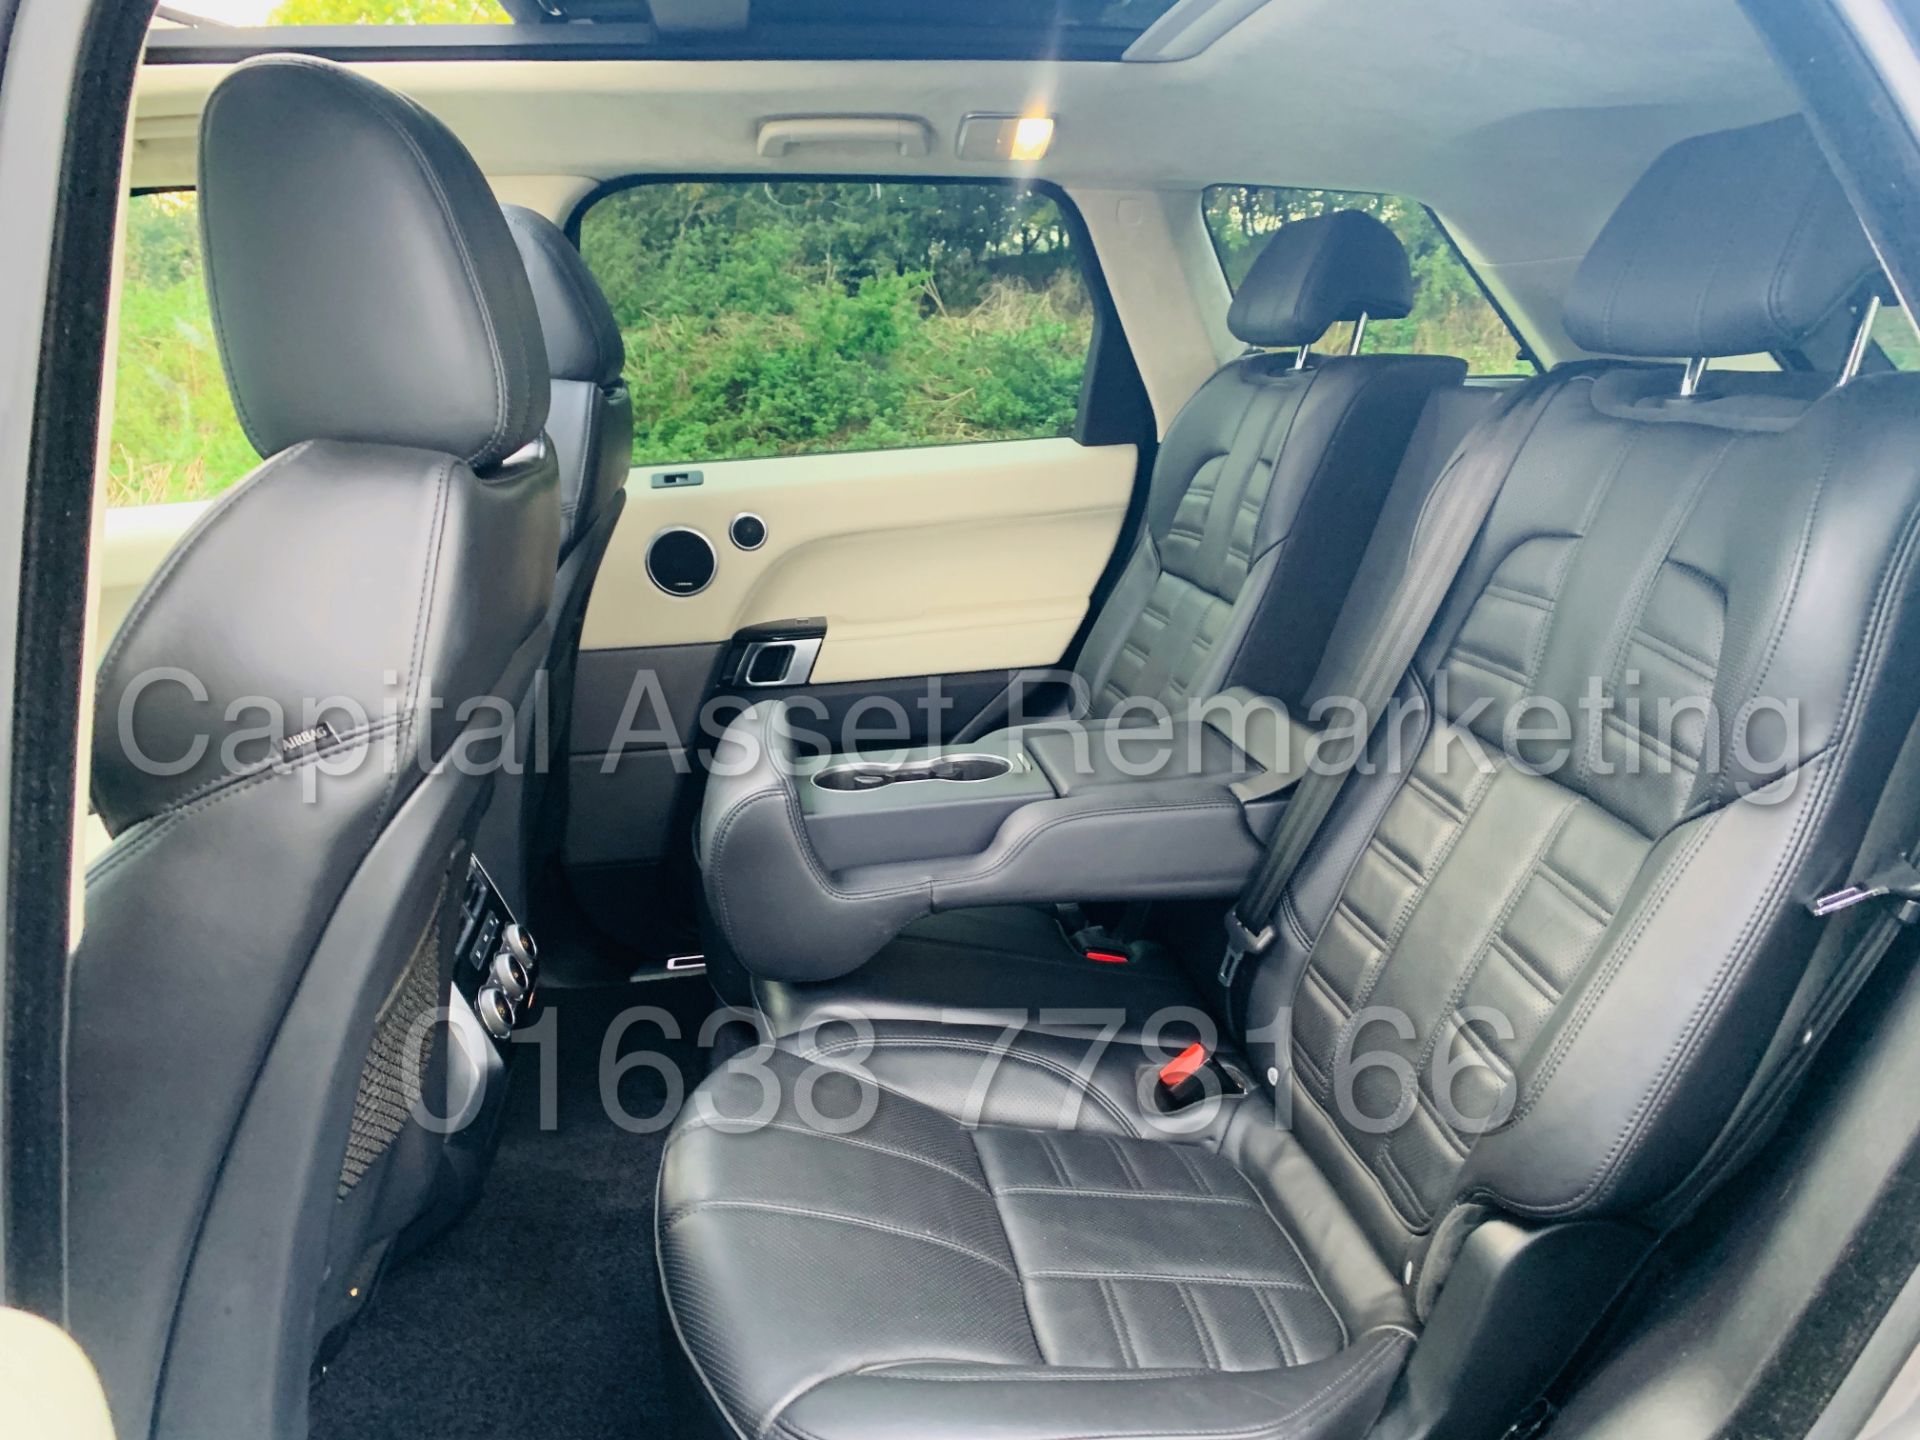 (ON SALE) RANGE ROVER SPORT "AUTOBIOGRAPHY DYNAMIC" 3.0 SDV6 AUTO - ULTIMATE SPEC - 16 REG -1 KEEPER - Image 33 of 70